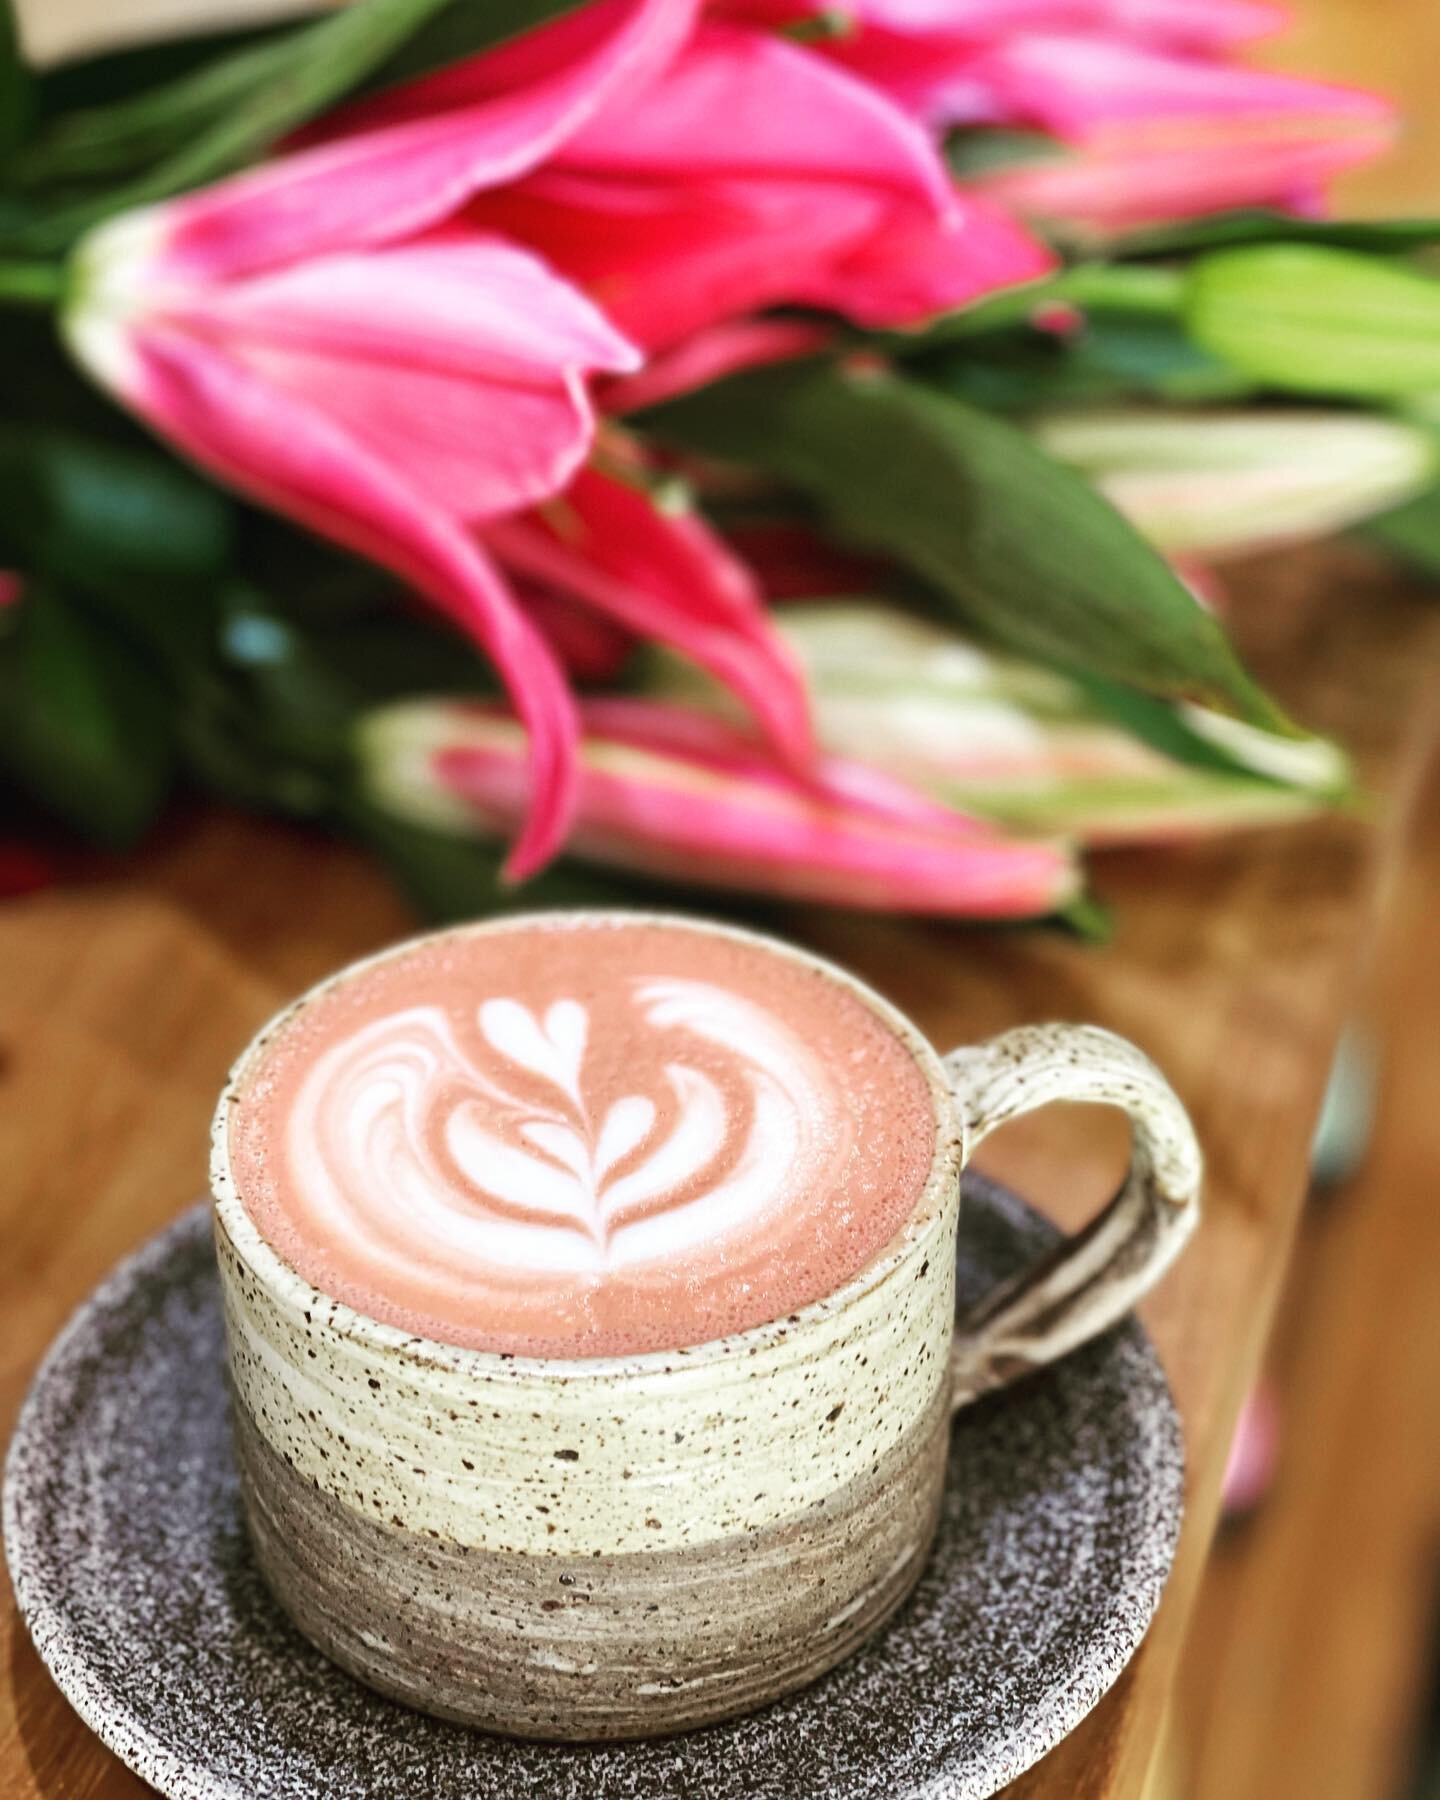 &ldquo;Hello coffee and flower lovers, let&rsquo;s begin.&rdquo;
Bloody Red Velvet latte with a dose of lilies on the side @cafebloombali @thebaliflorist

. . . 
Caf&eacute; Bloom Bali
coffee | tea | pastries
#goodfood #goodmood 
Serving Mon-Sat from